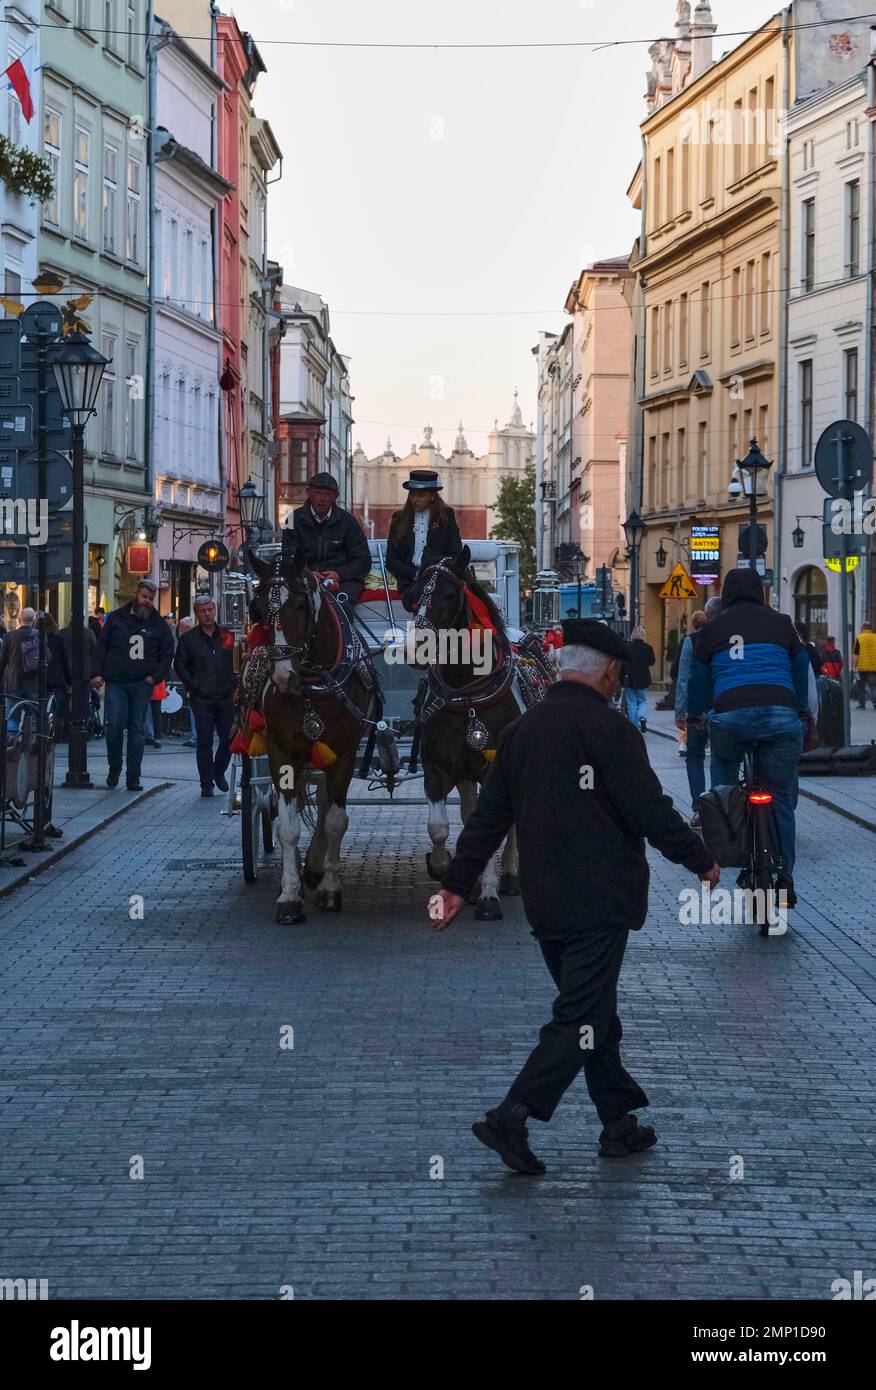 An old person crossing the street in Krakow with a horse carriage in the background. Stock Photo